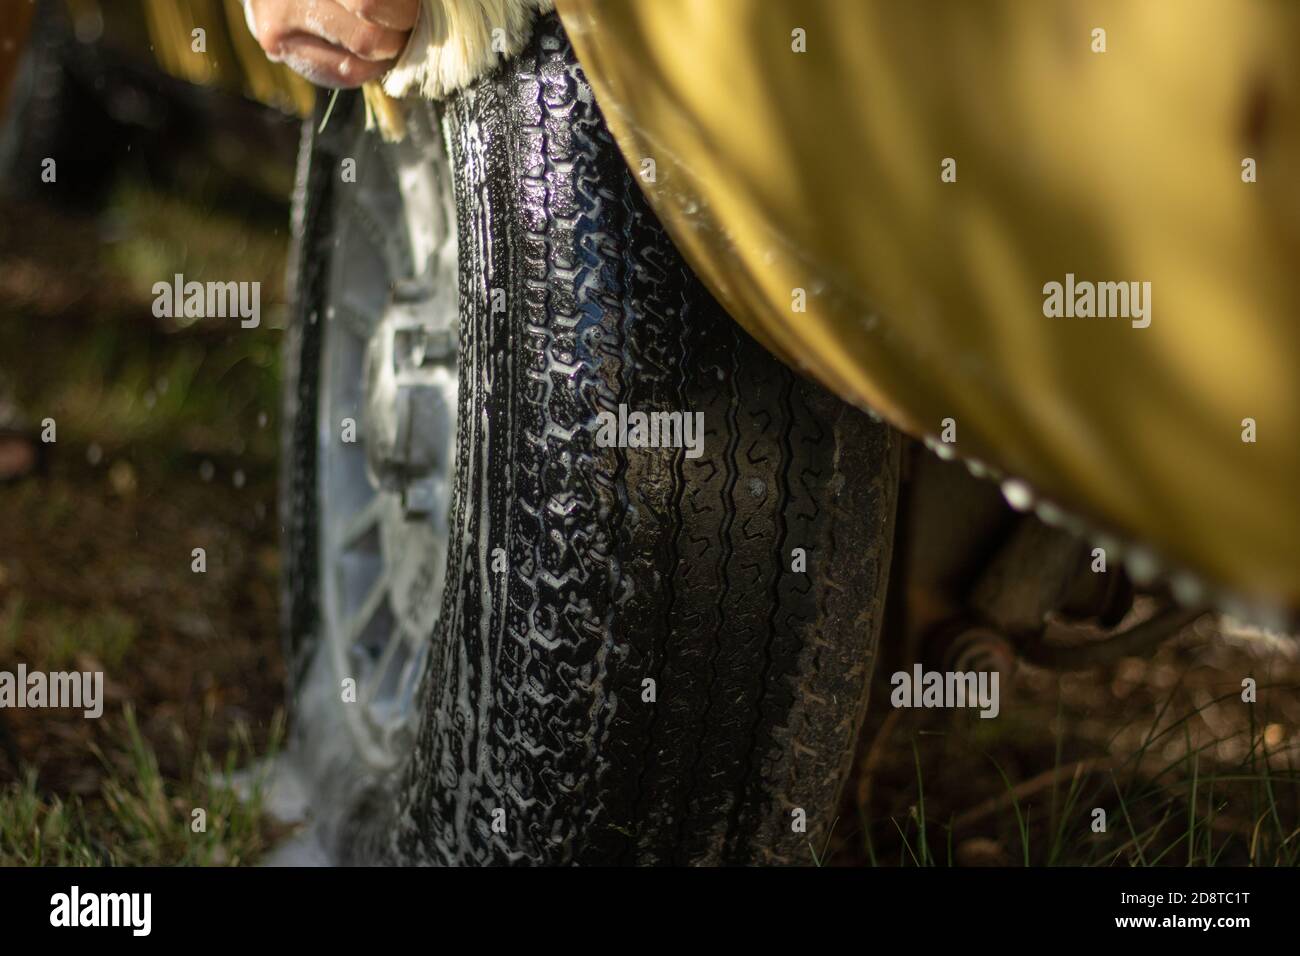 A young men washing an old vintage car Stock Photo